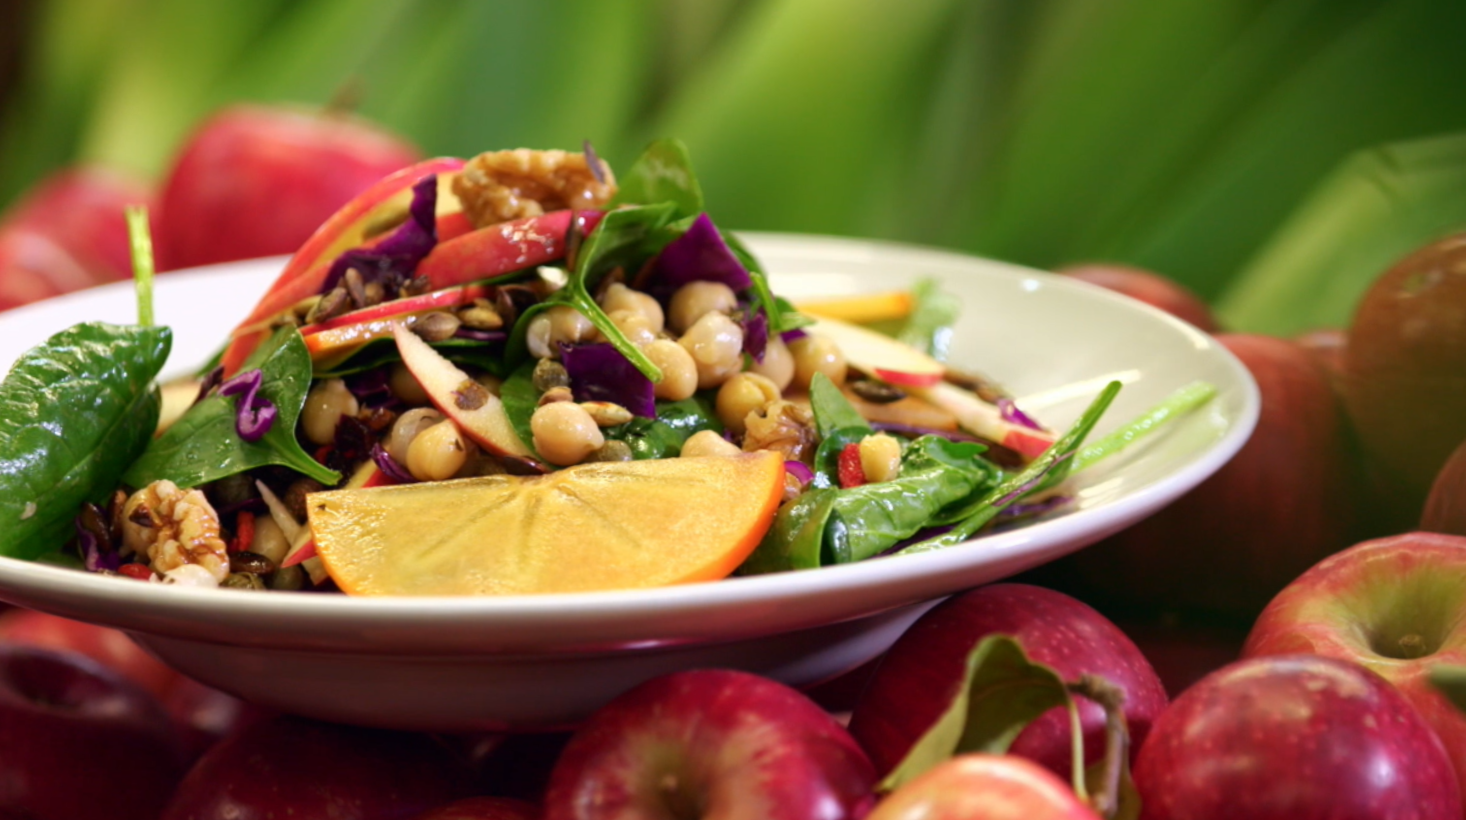 She'll Be Apples Superfood Salad